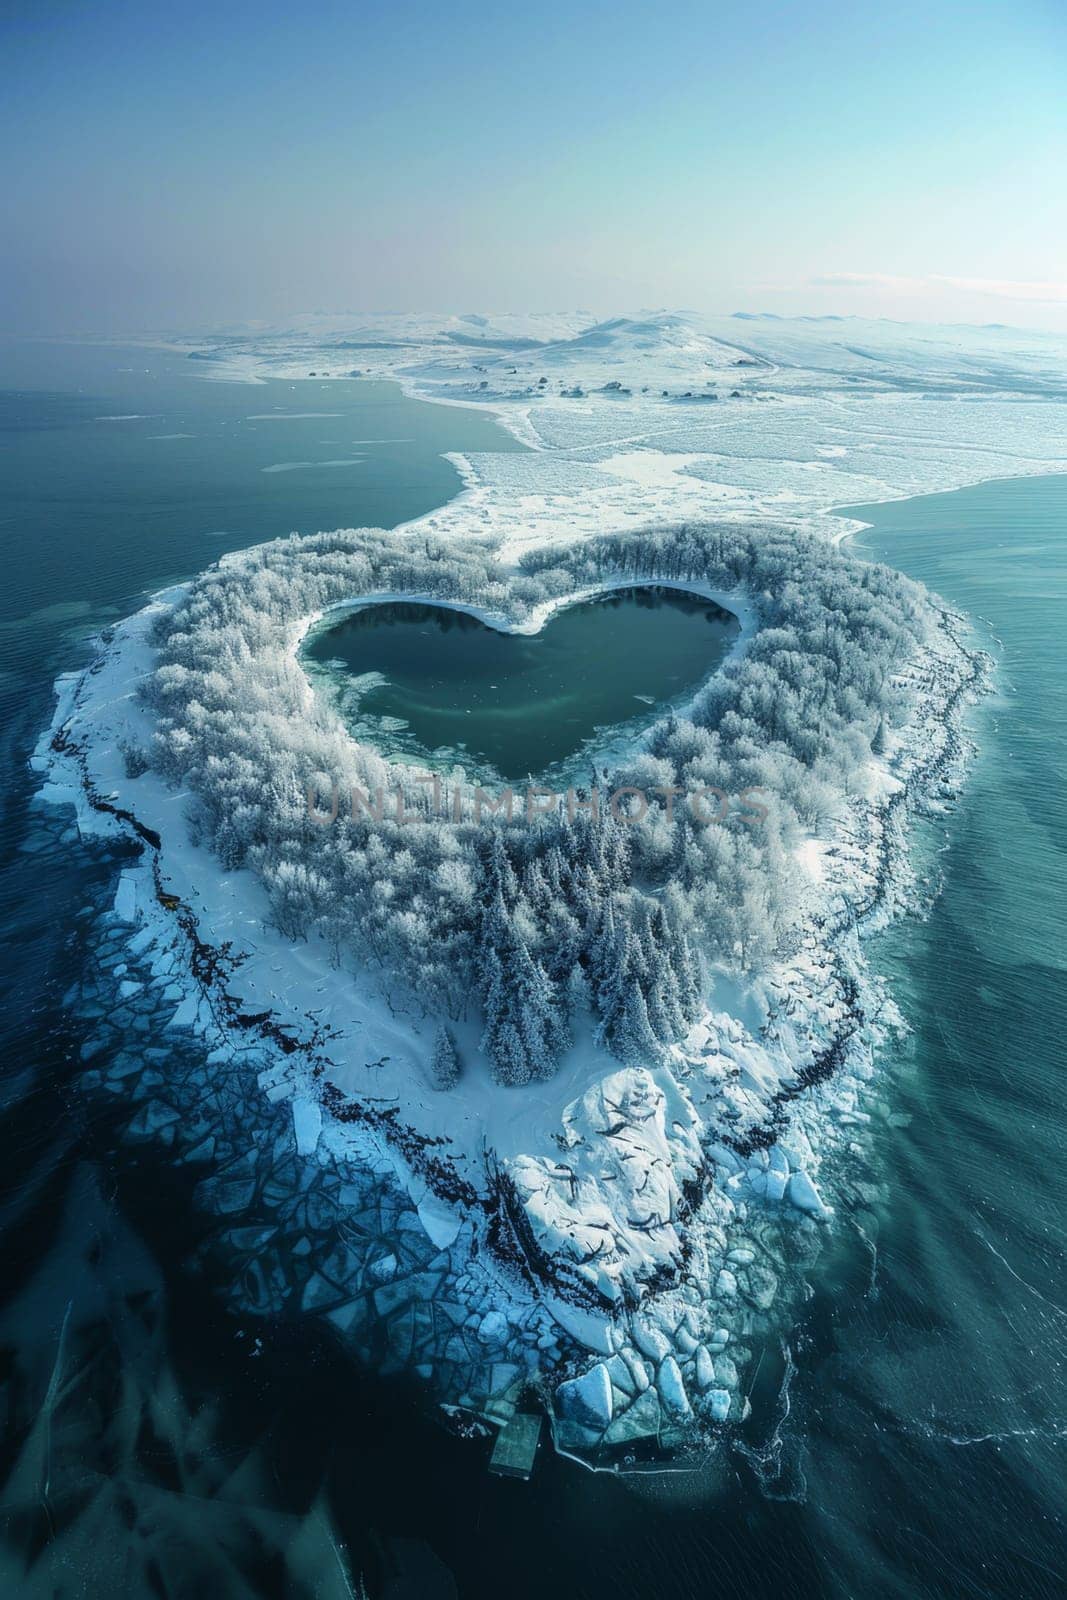 An island in the sea in winter in the shape of a heart by Lobachad